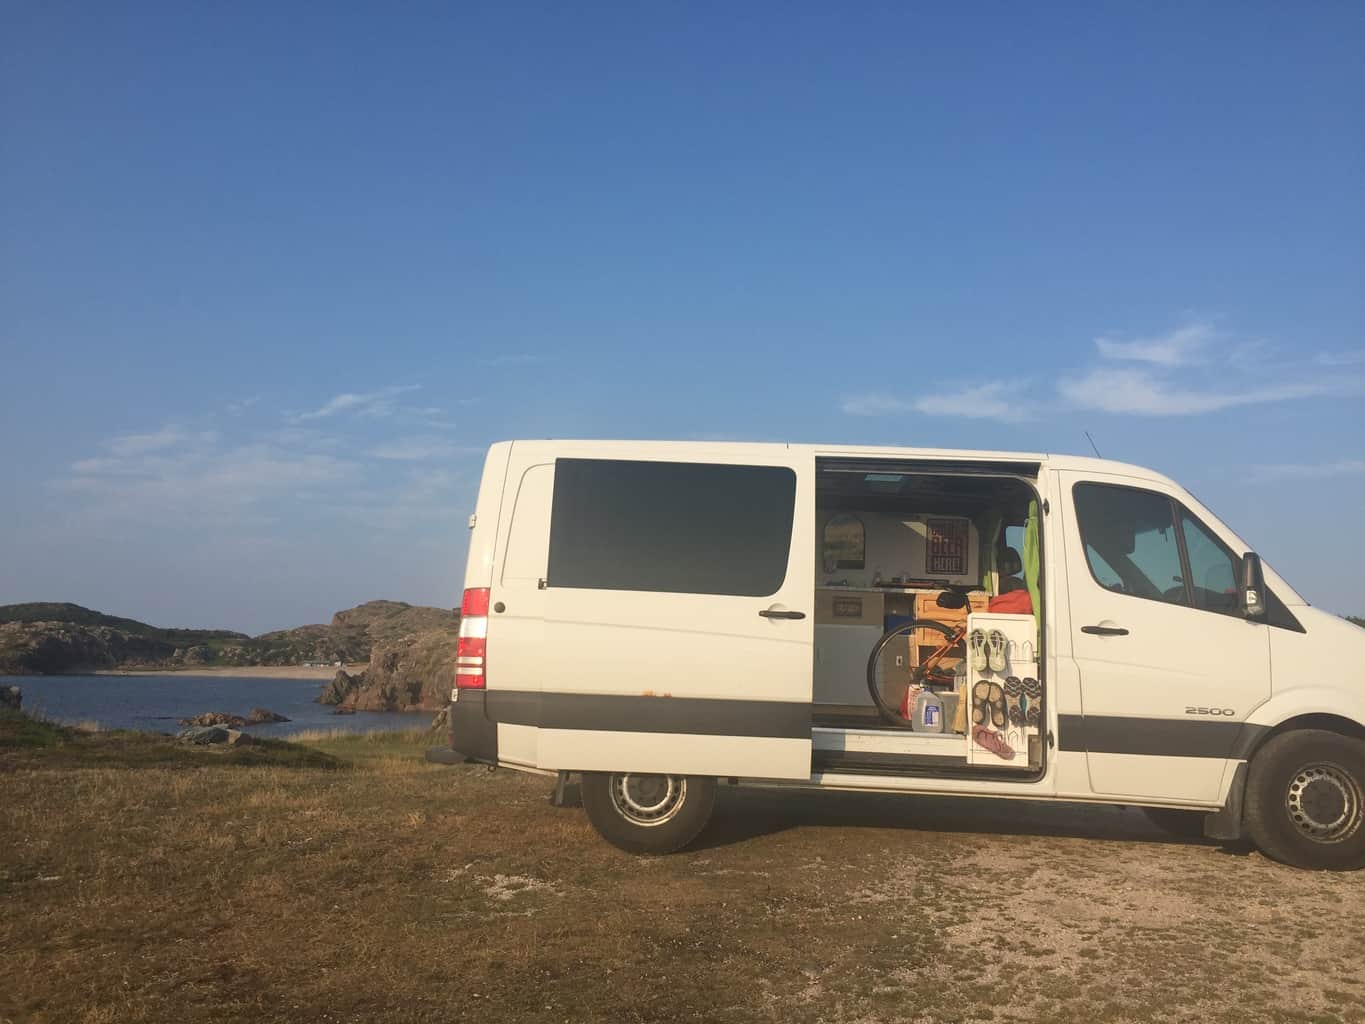 The van parked by the ocean